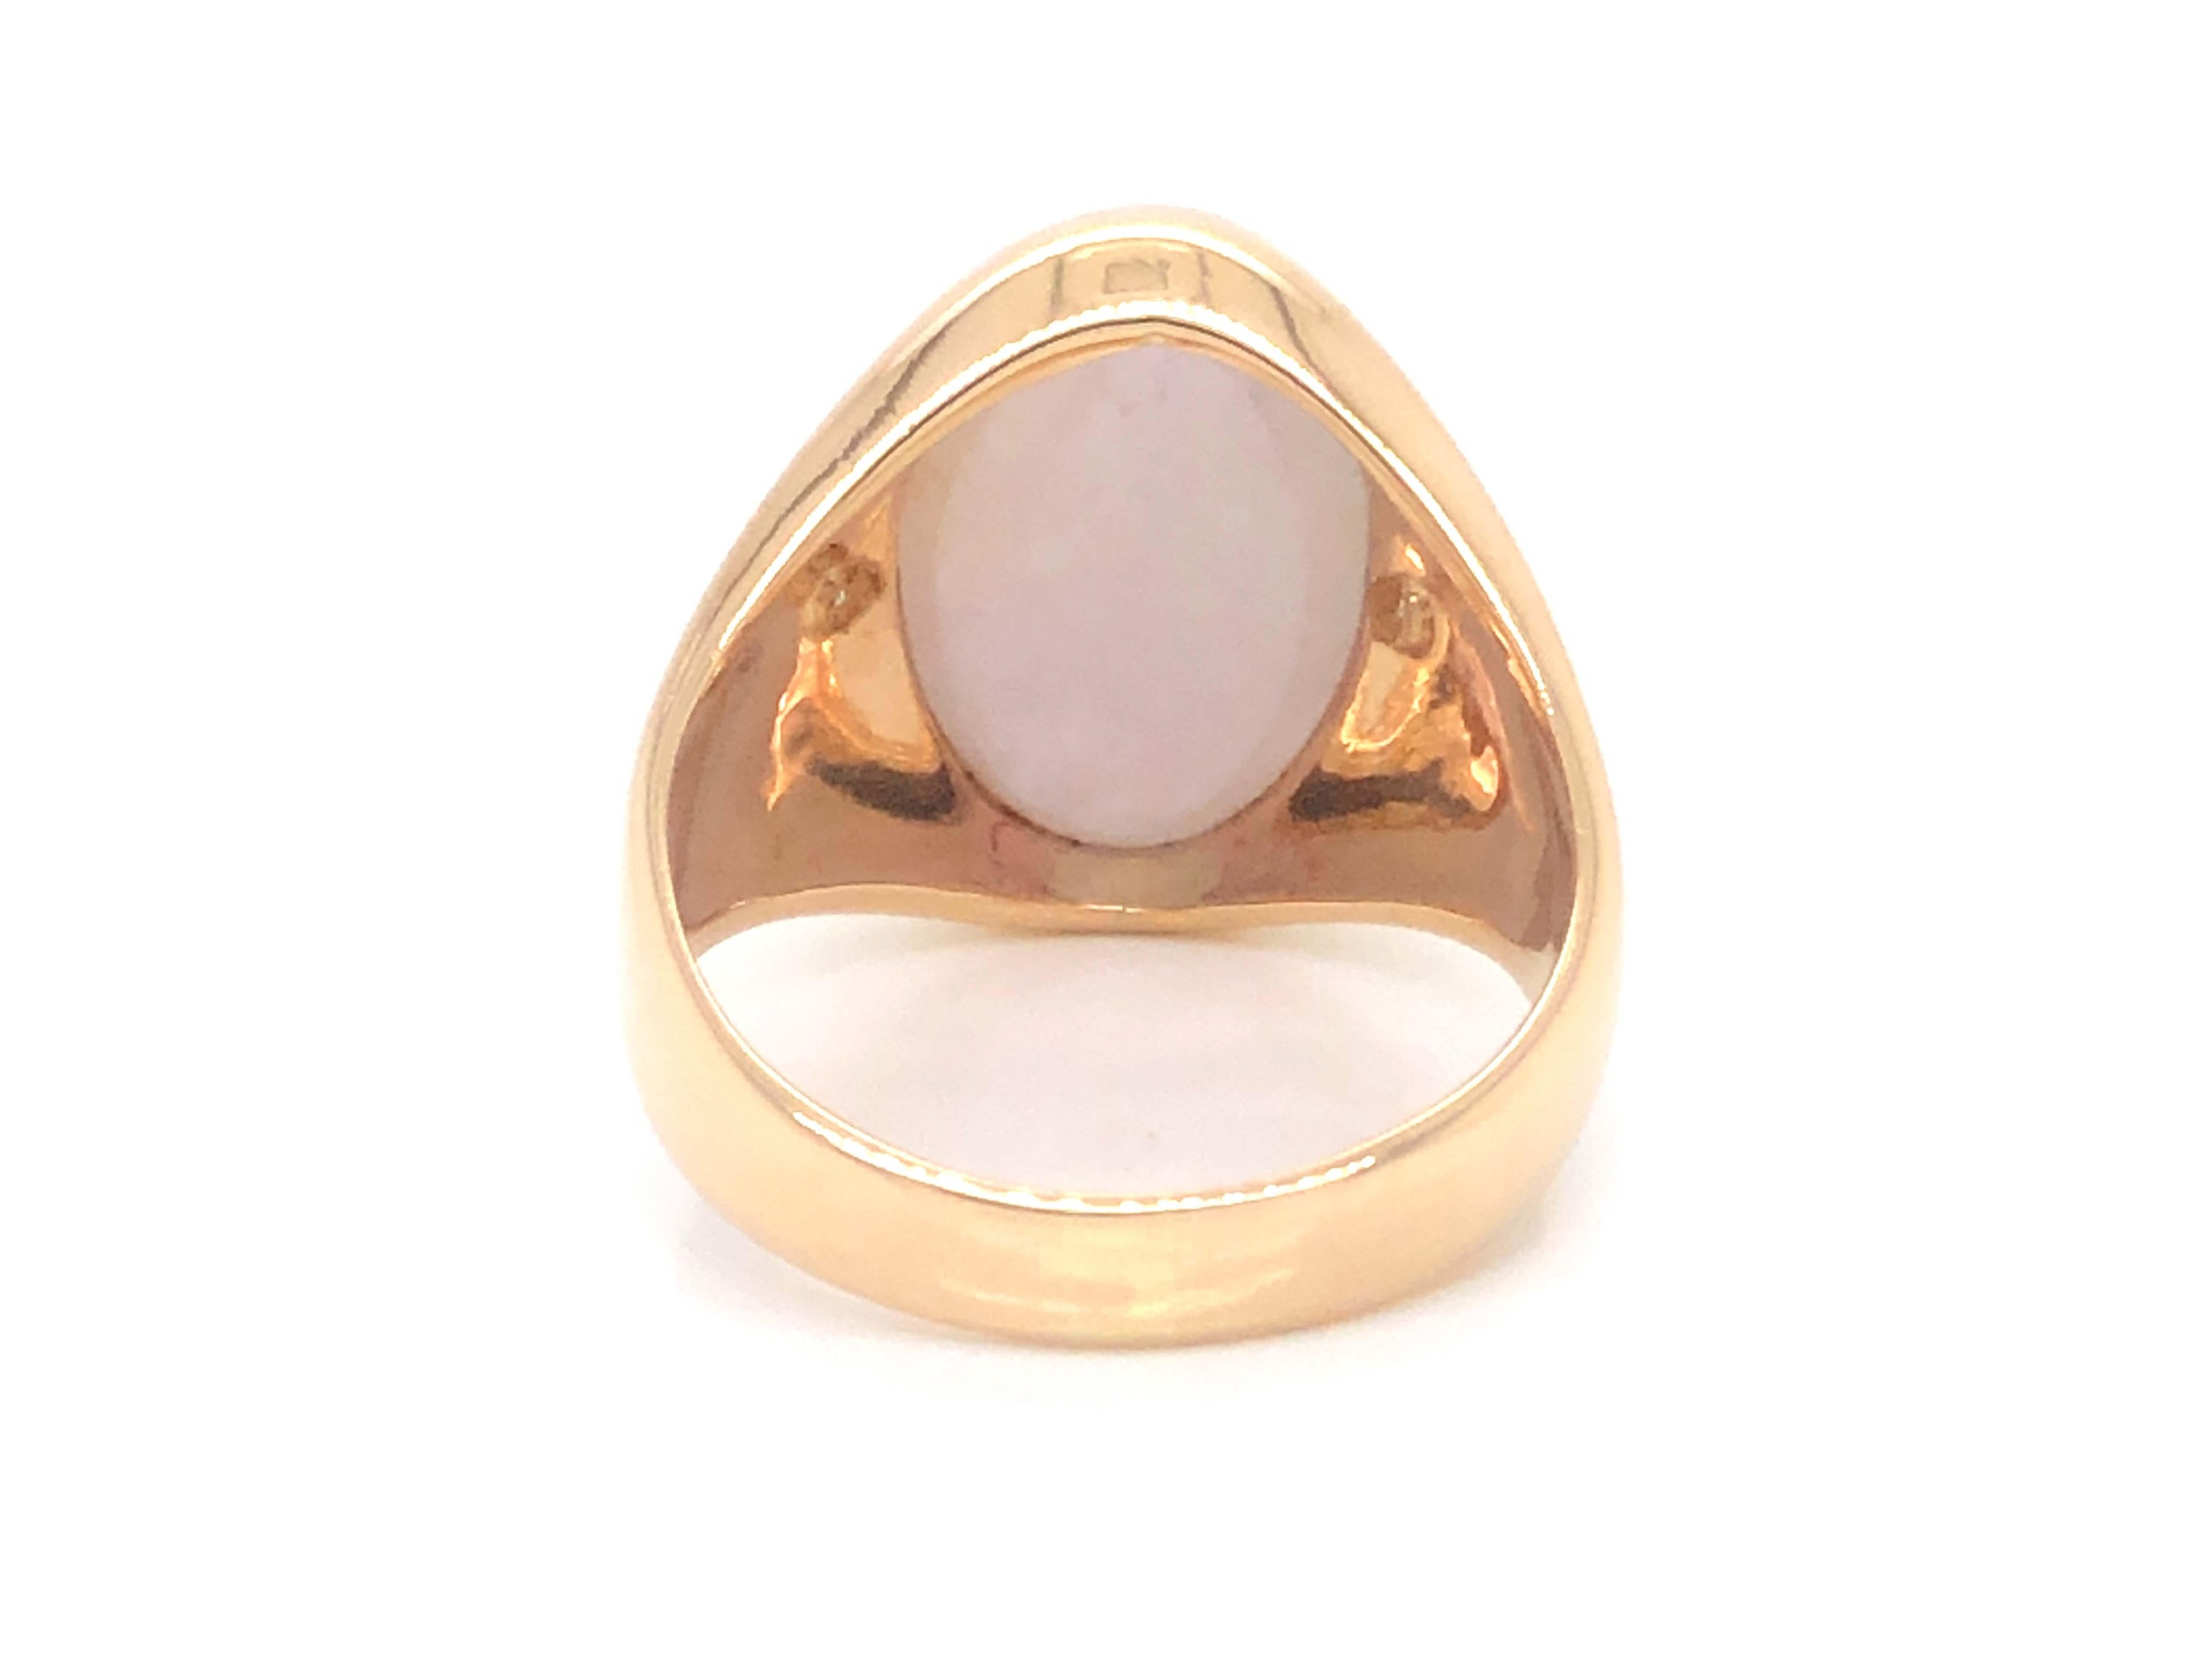 Men's Oval White Jade and Diamond Ring - 14k Yellow Gold For Sale 1